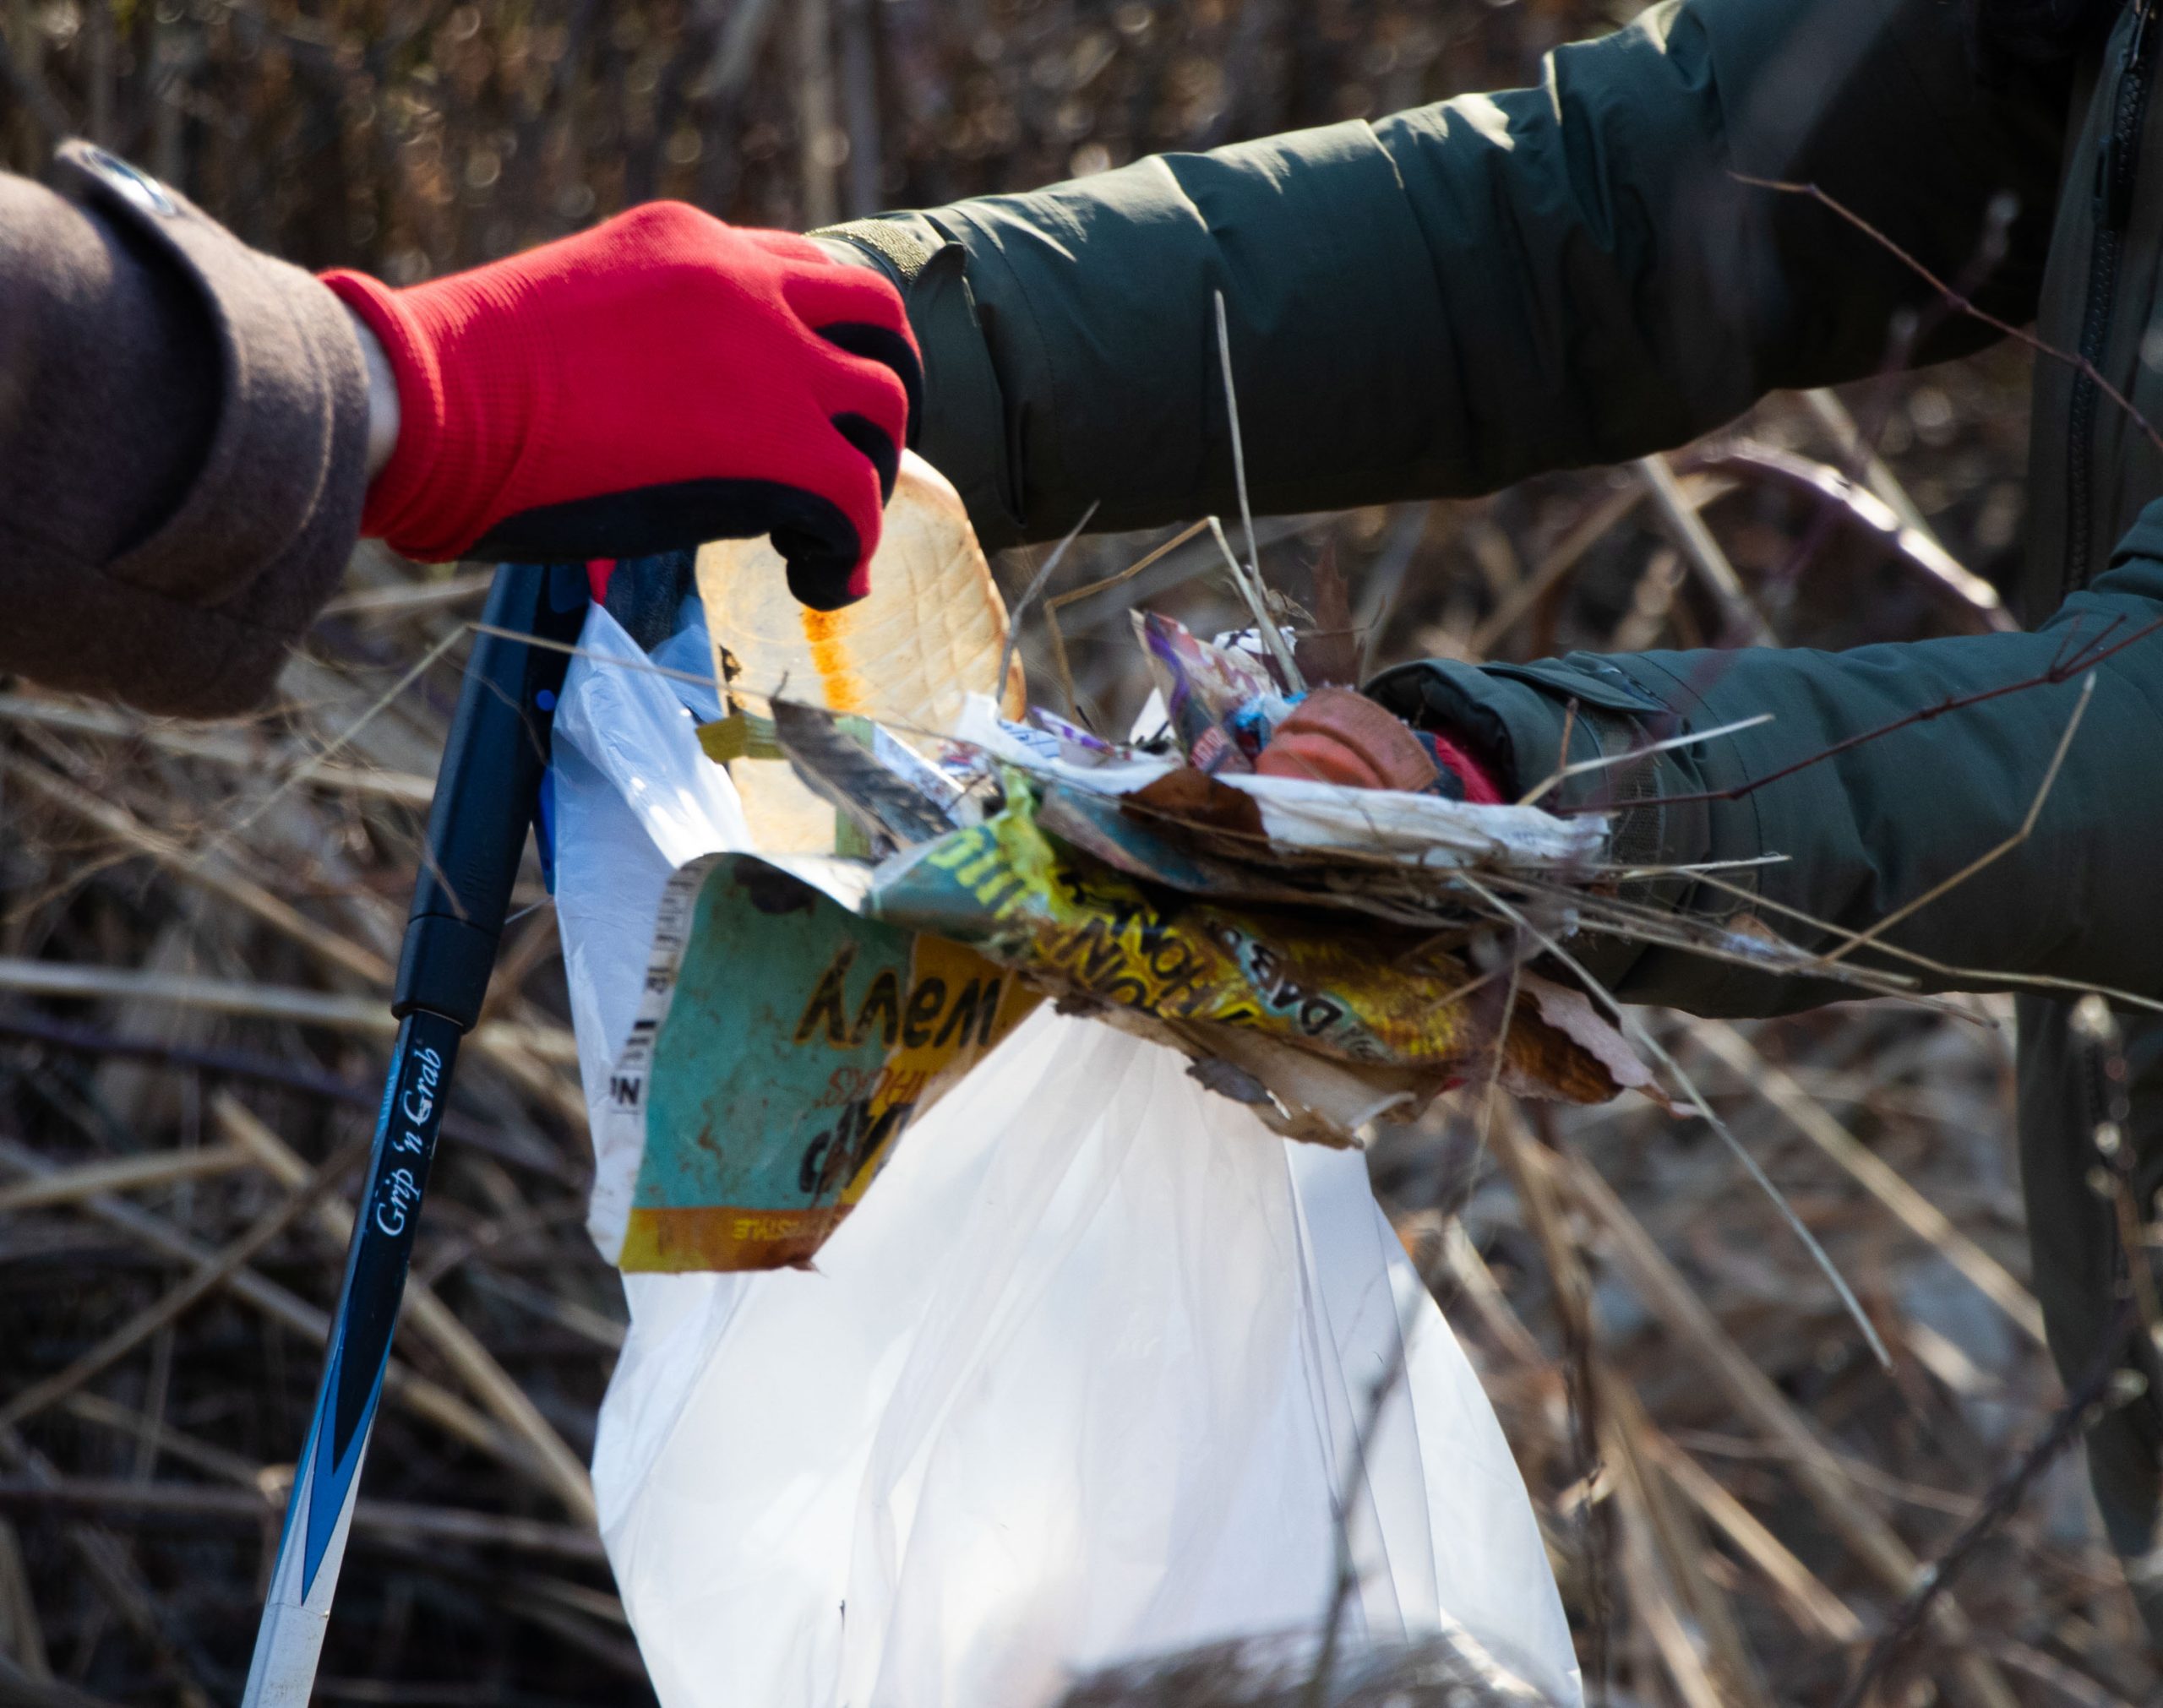 Volunteers pick up trash from the park during the cleanup in honor of Martin Luther King on Saturday.  (Isabel Miller | Medill News Service)